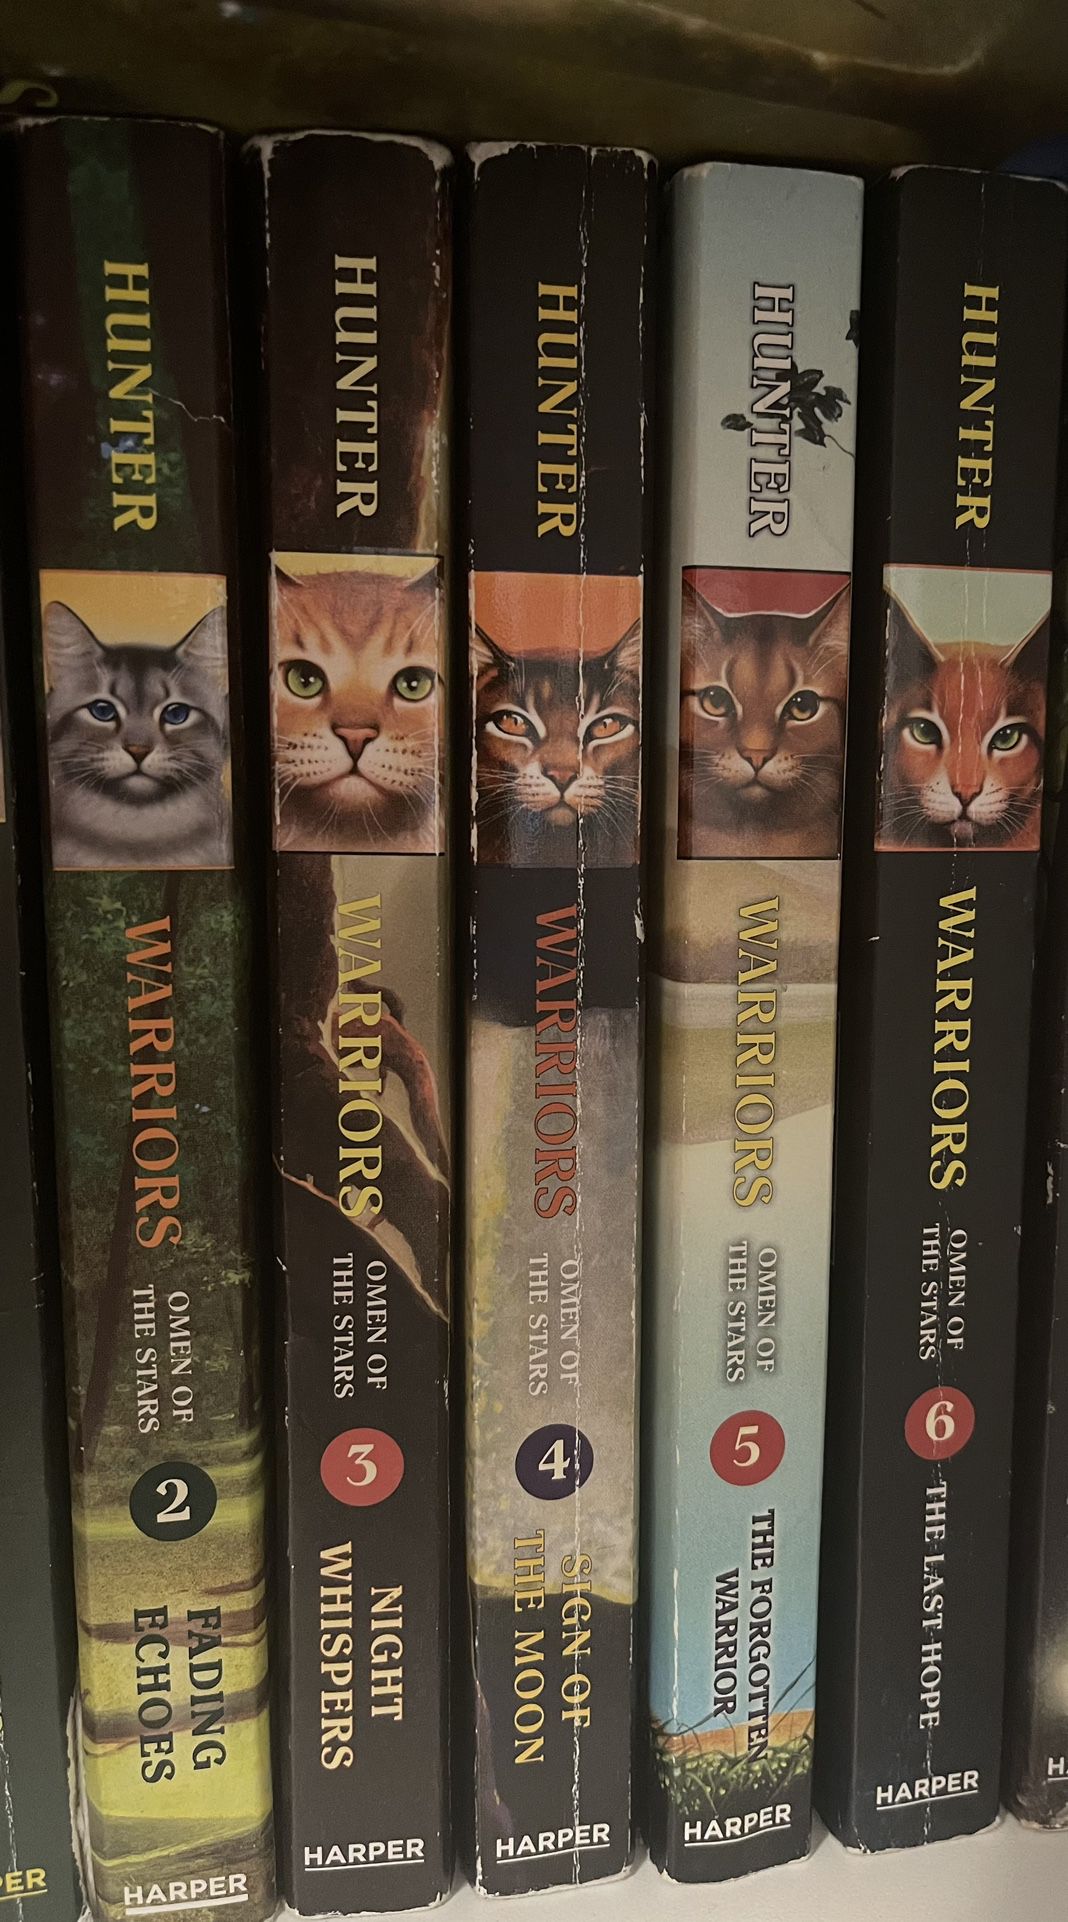 Warrior Cats 4th Series Paperback (Books 2-6)